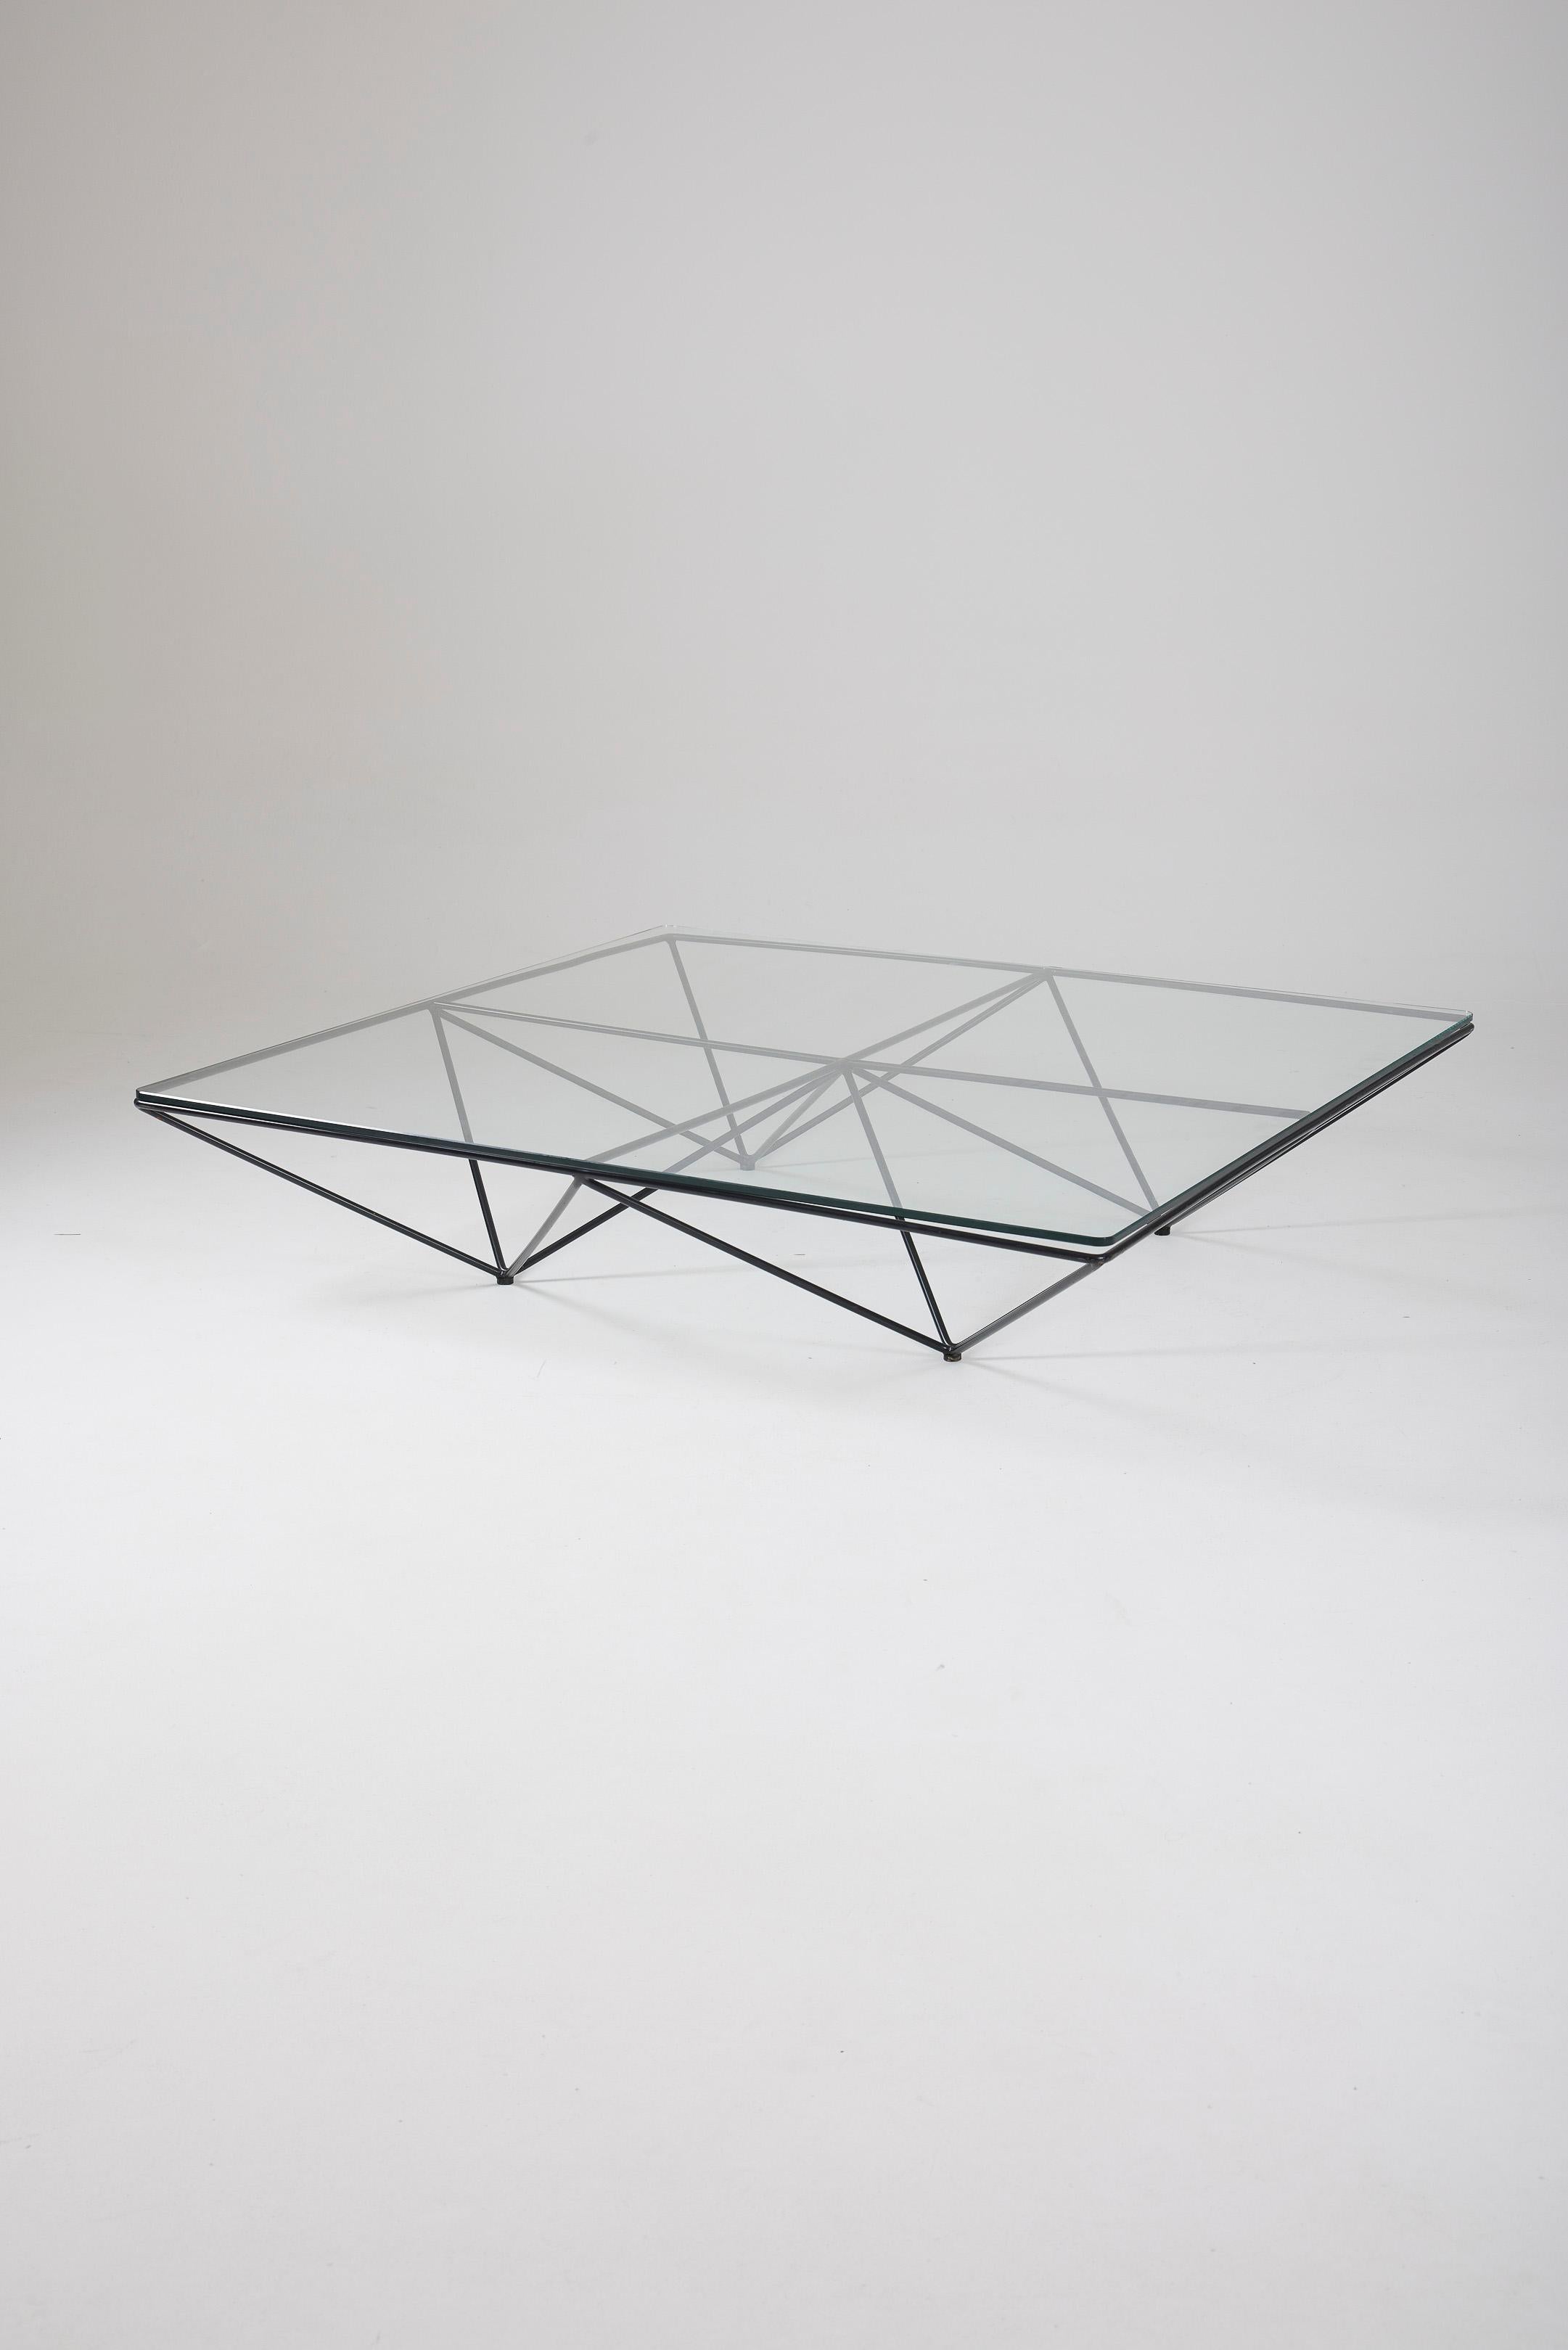 Square coffee table by designer Paolo Piva for B&B Italia in the 1980s. The glass tabletop rests on a black-laminated steel base, geometric in shape. Very good condition.
DV571